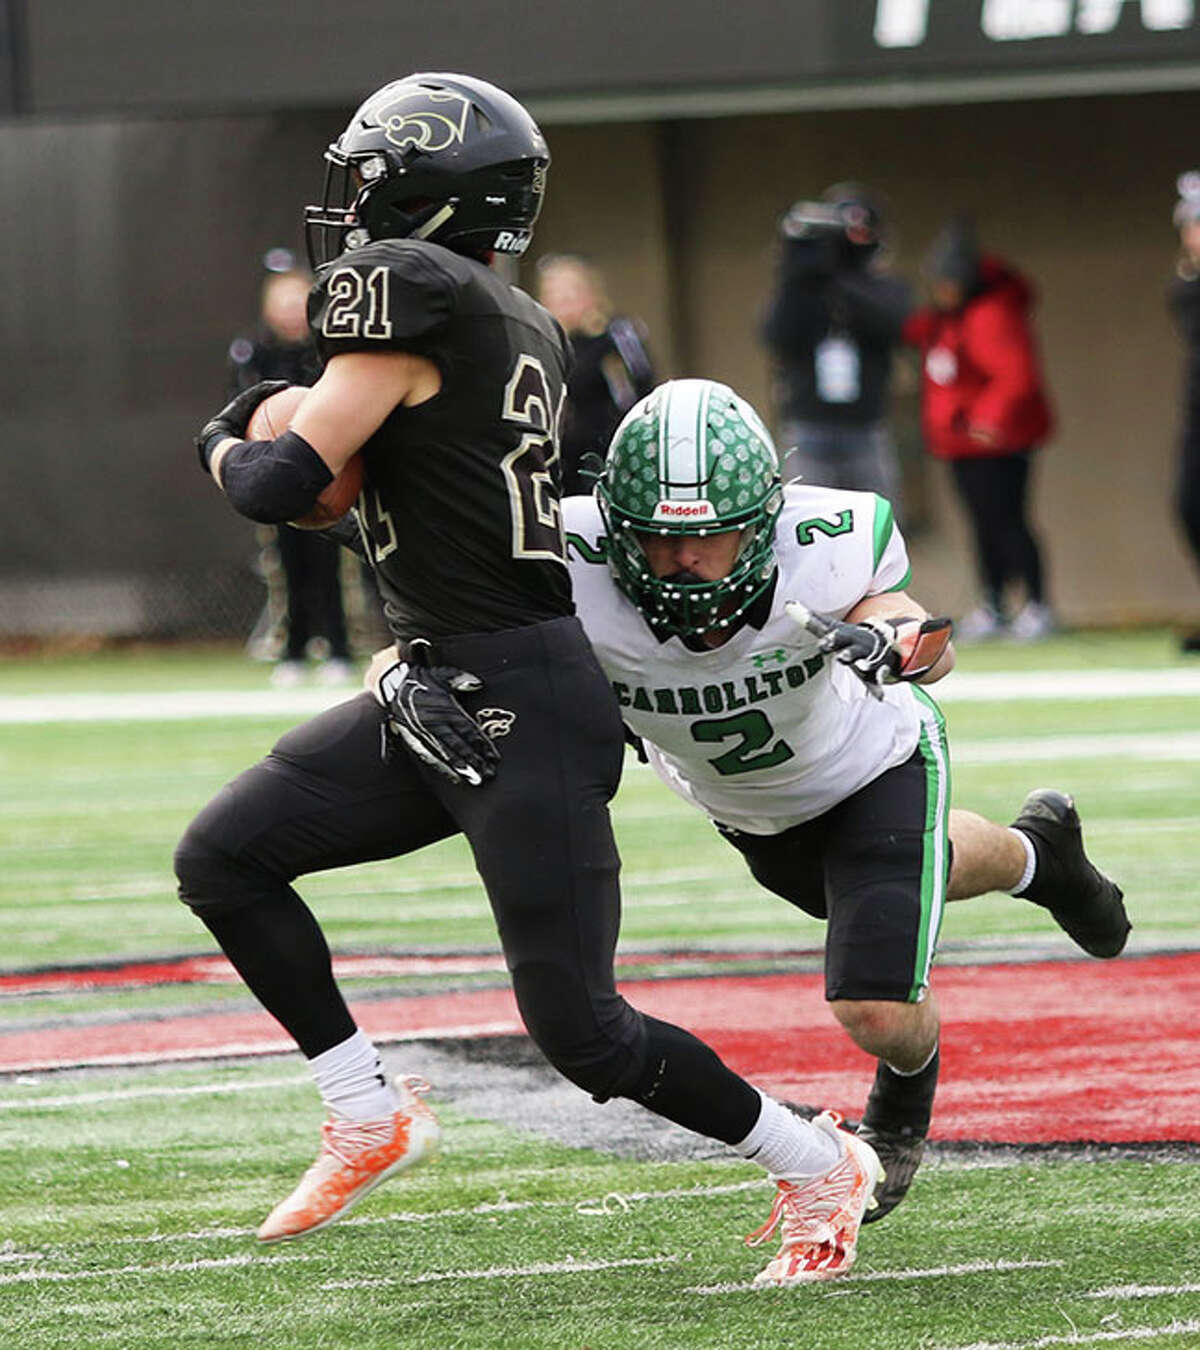 Carrollton's Kyle Leonard (right) tackles Le-Win's Jake Zeal on Friday in the Class 1A football state championship game at Huskie Stadium in DeKalb.